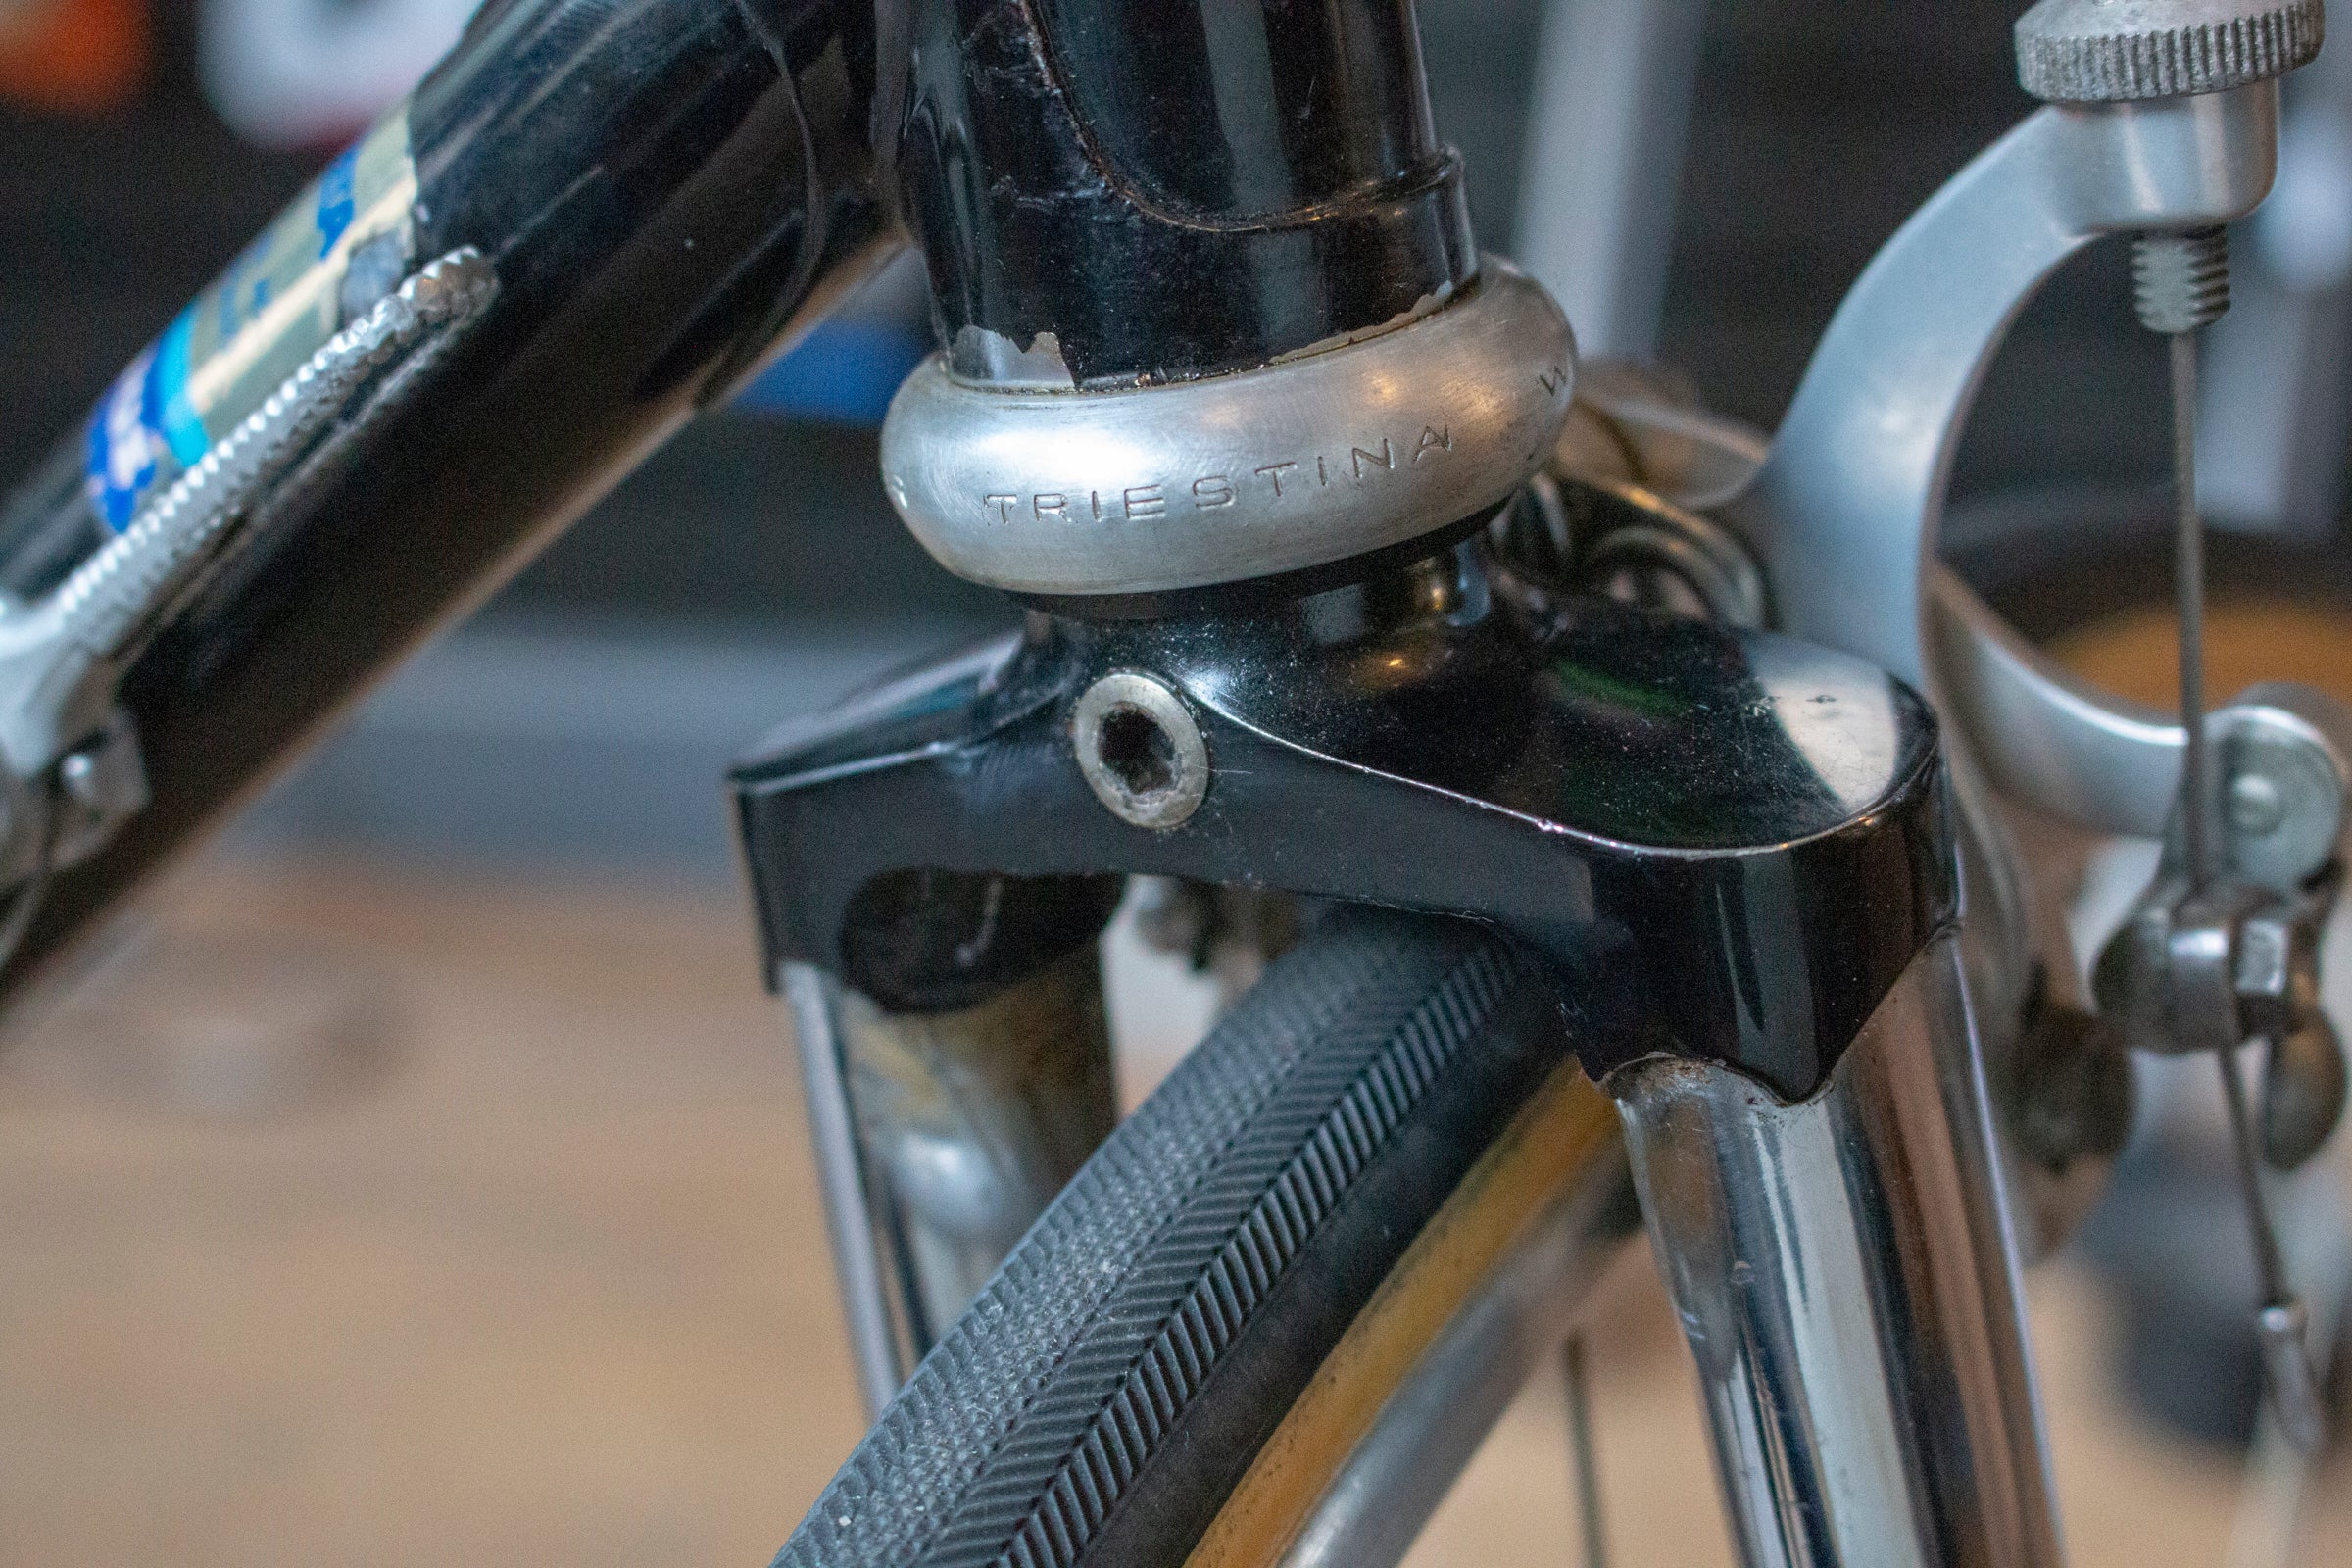 How to get the right brakes - Allen key fitment - Pedal Pedlar Classic & Vintage Cycling